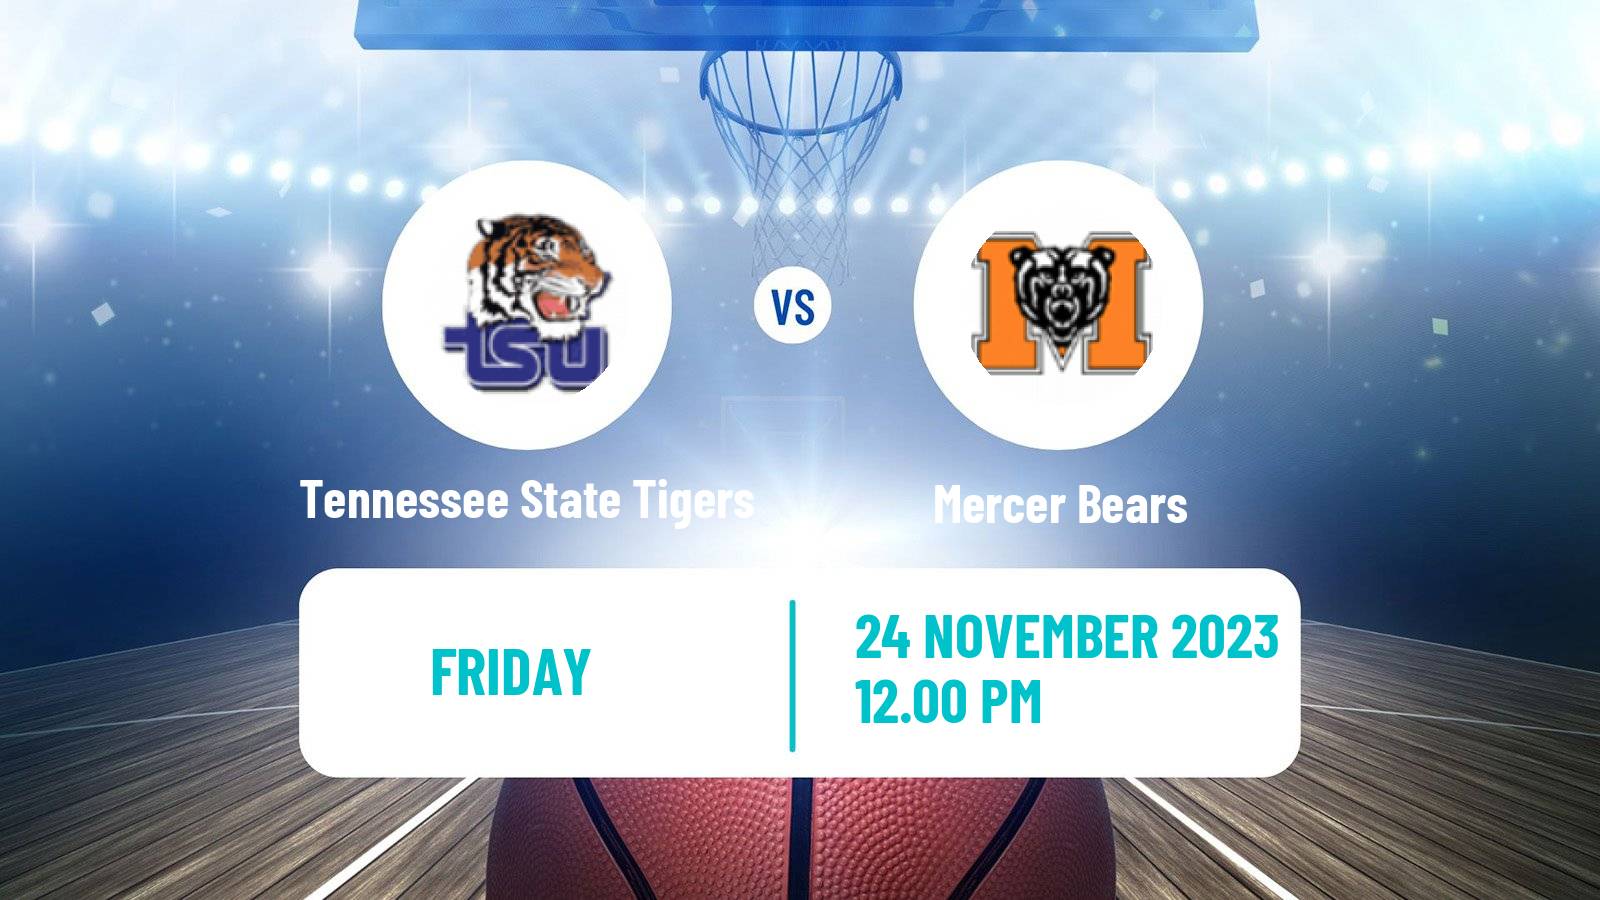 Basketball NCAA College Basketball Tennessee State Tigers - Mercer Bears